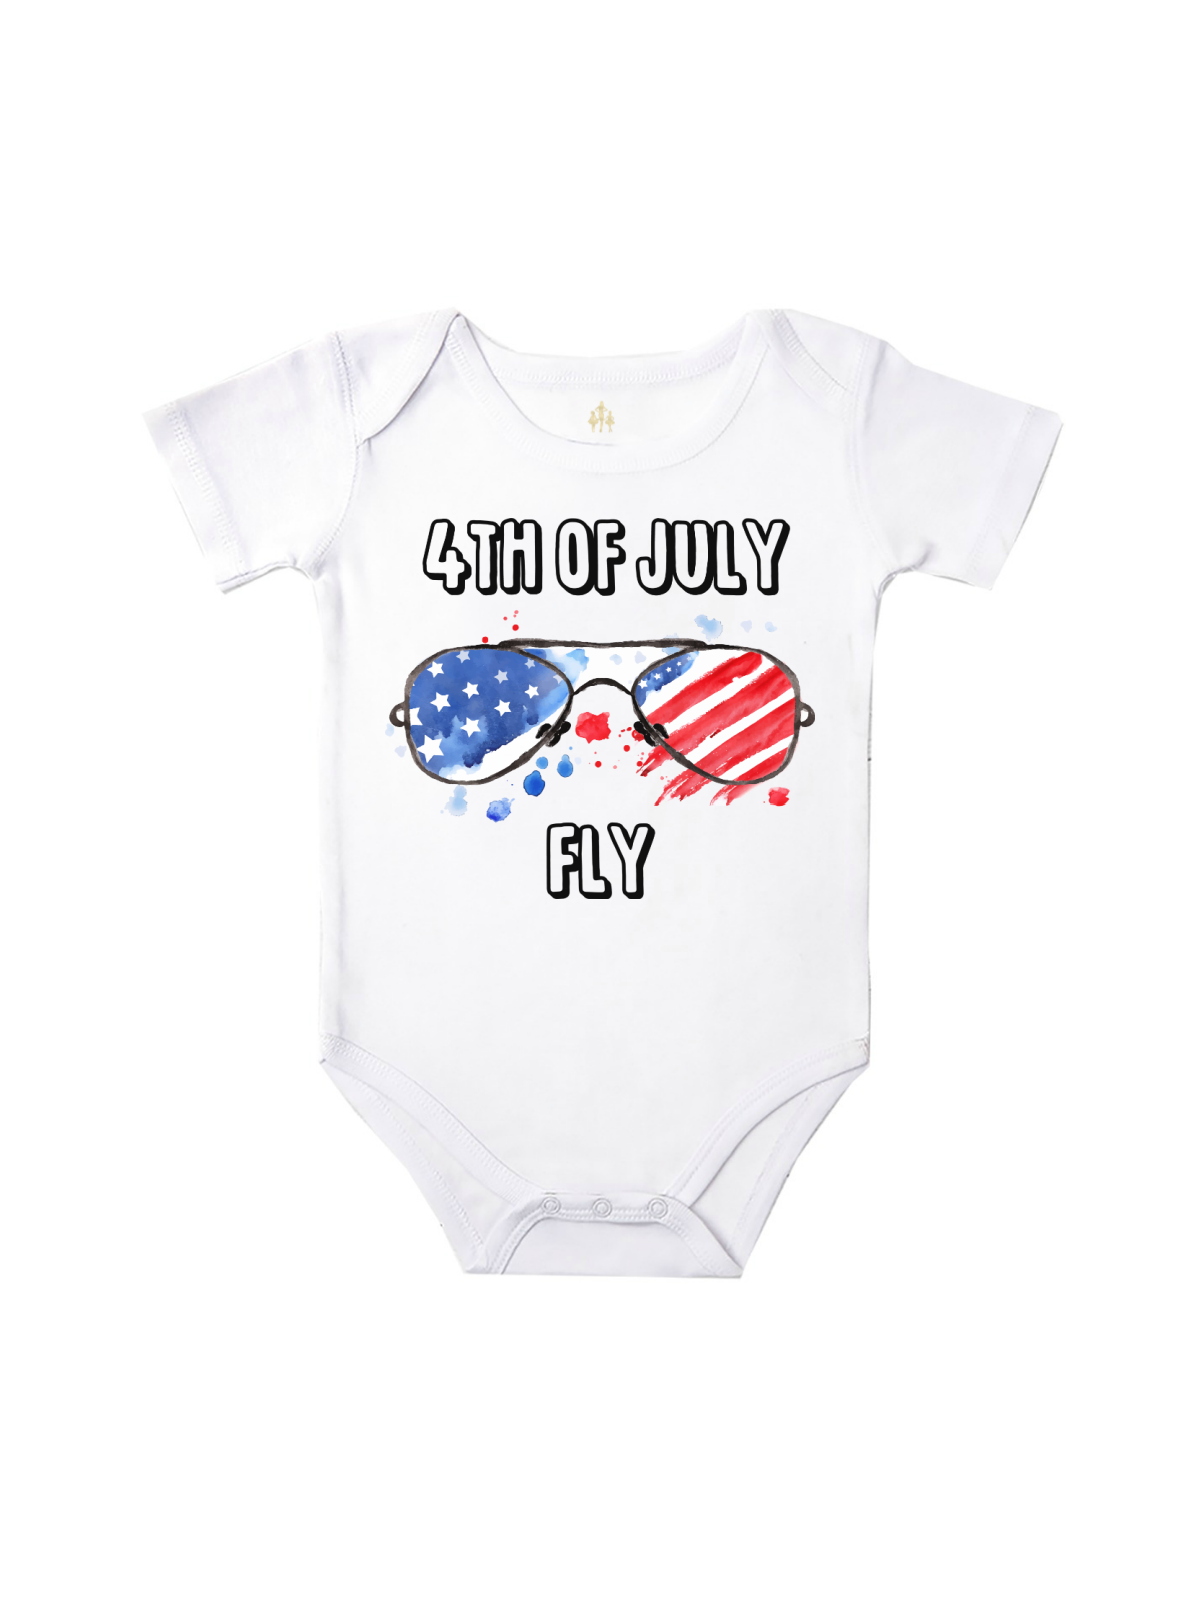 4th of July Fly baby bodysuit